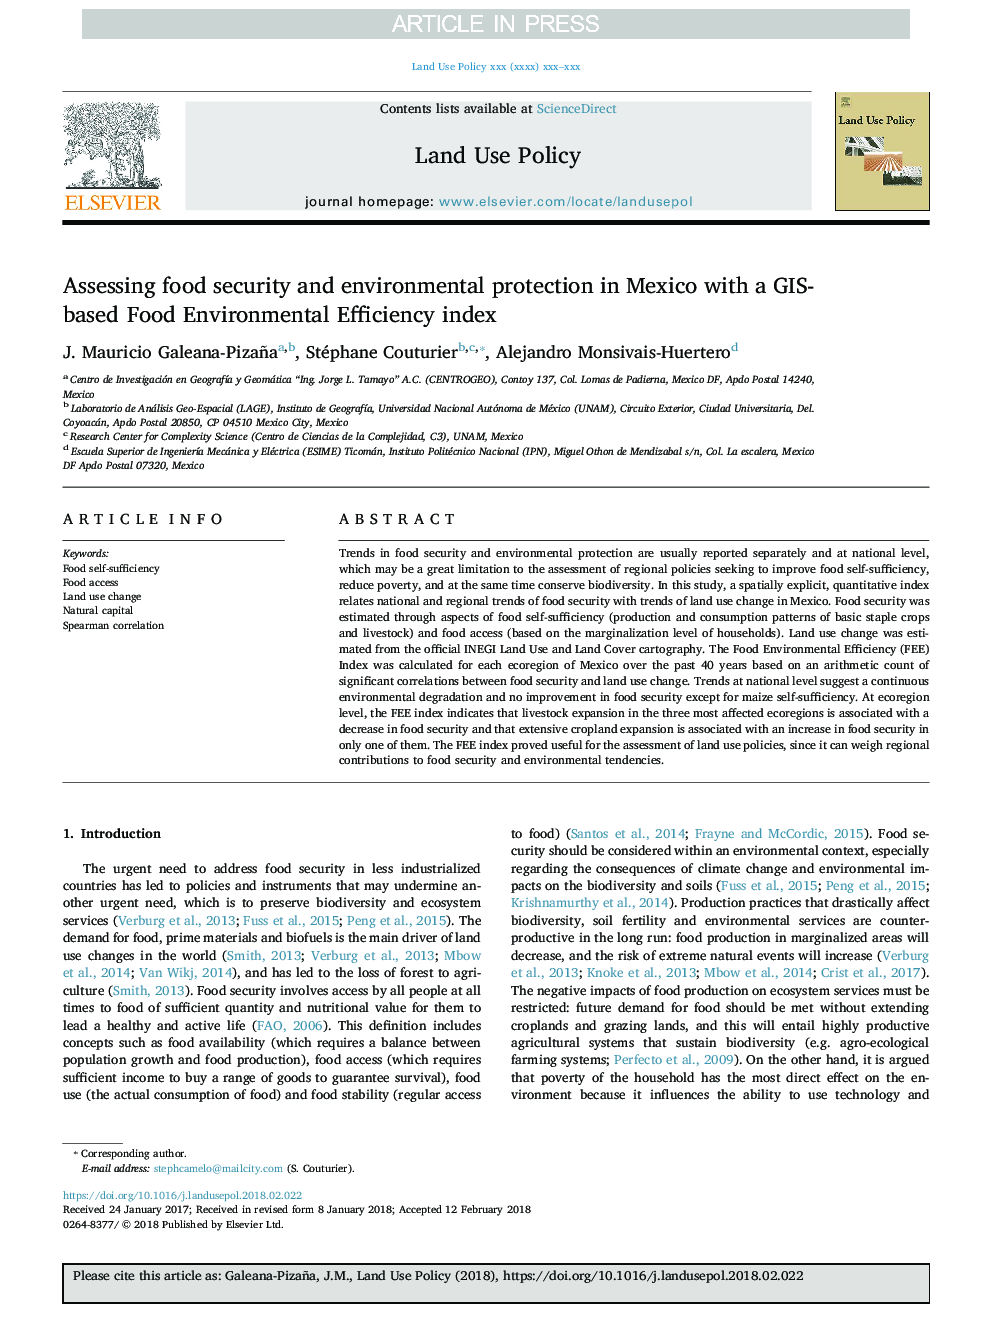 Assessing food security and environmental protection in Mexico with a GIS-based Food Environmental Efficiency index